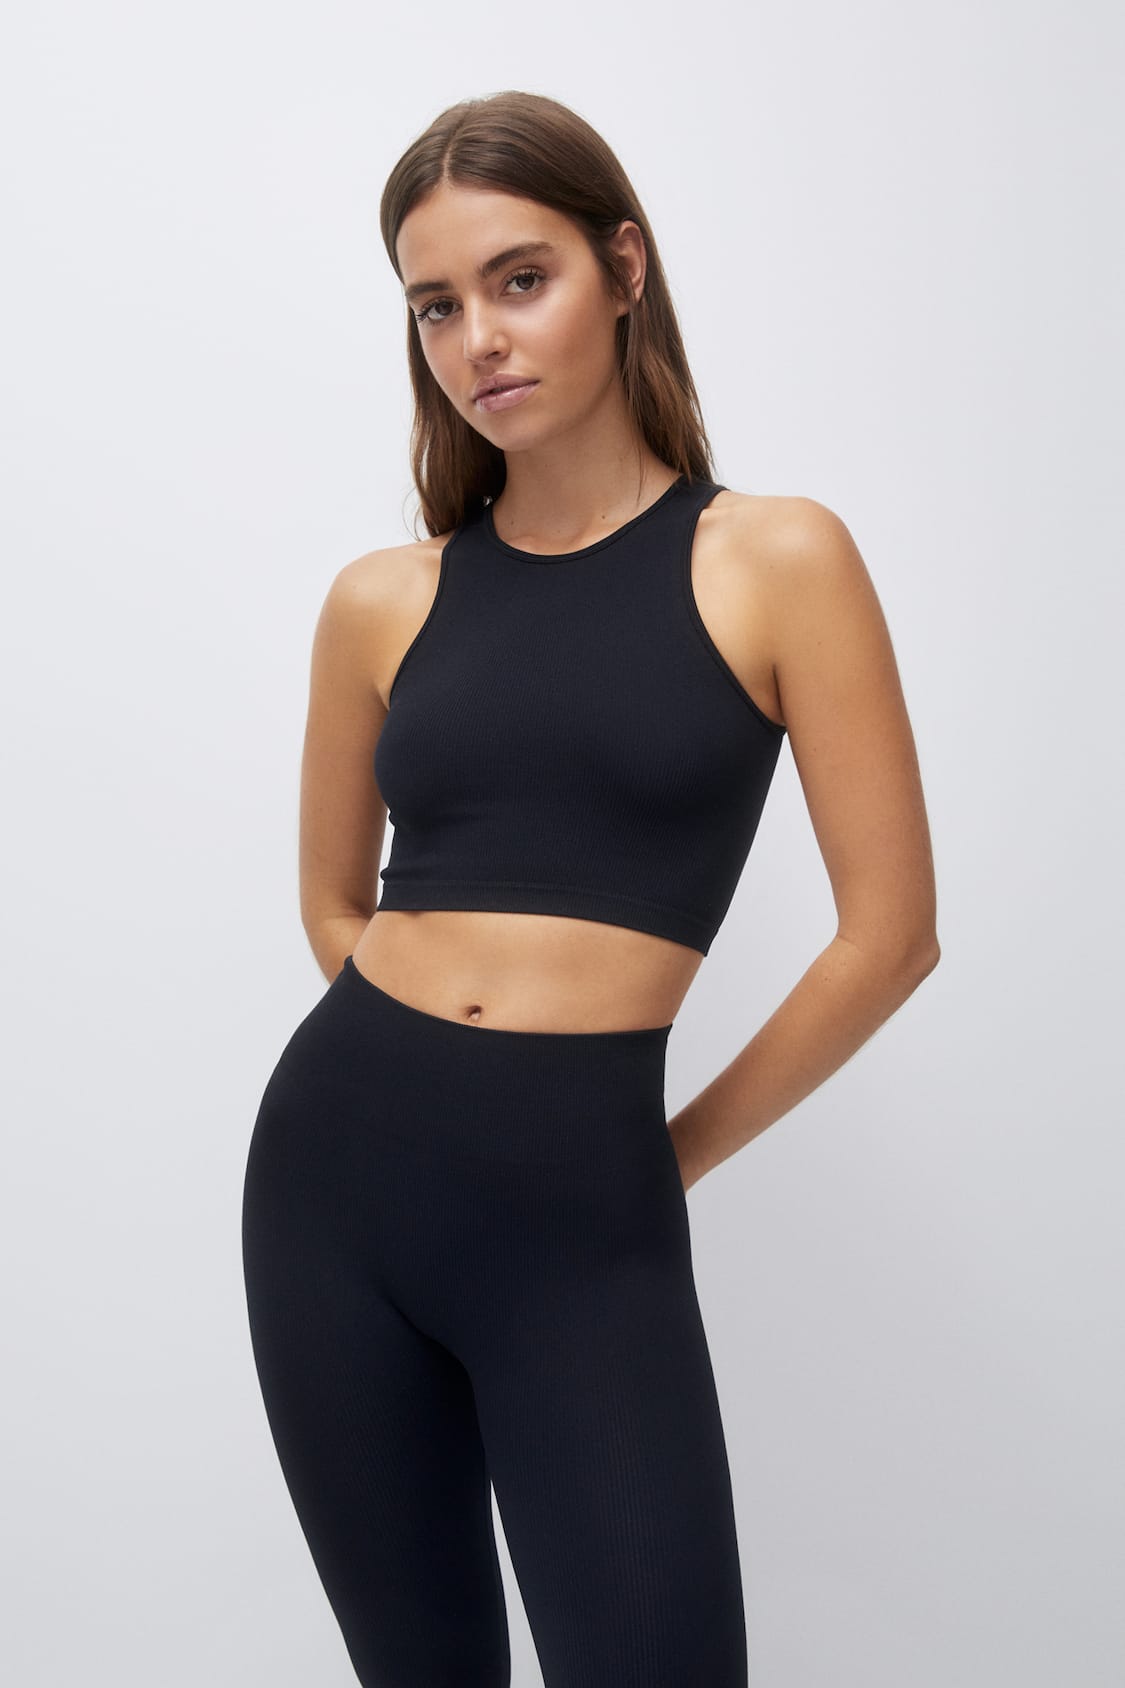 Seamless Leggings by Pull&Bear Online, THE ICONIC